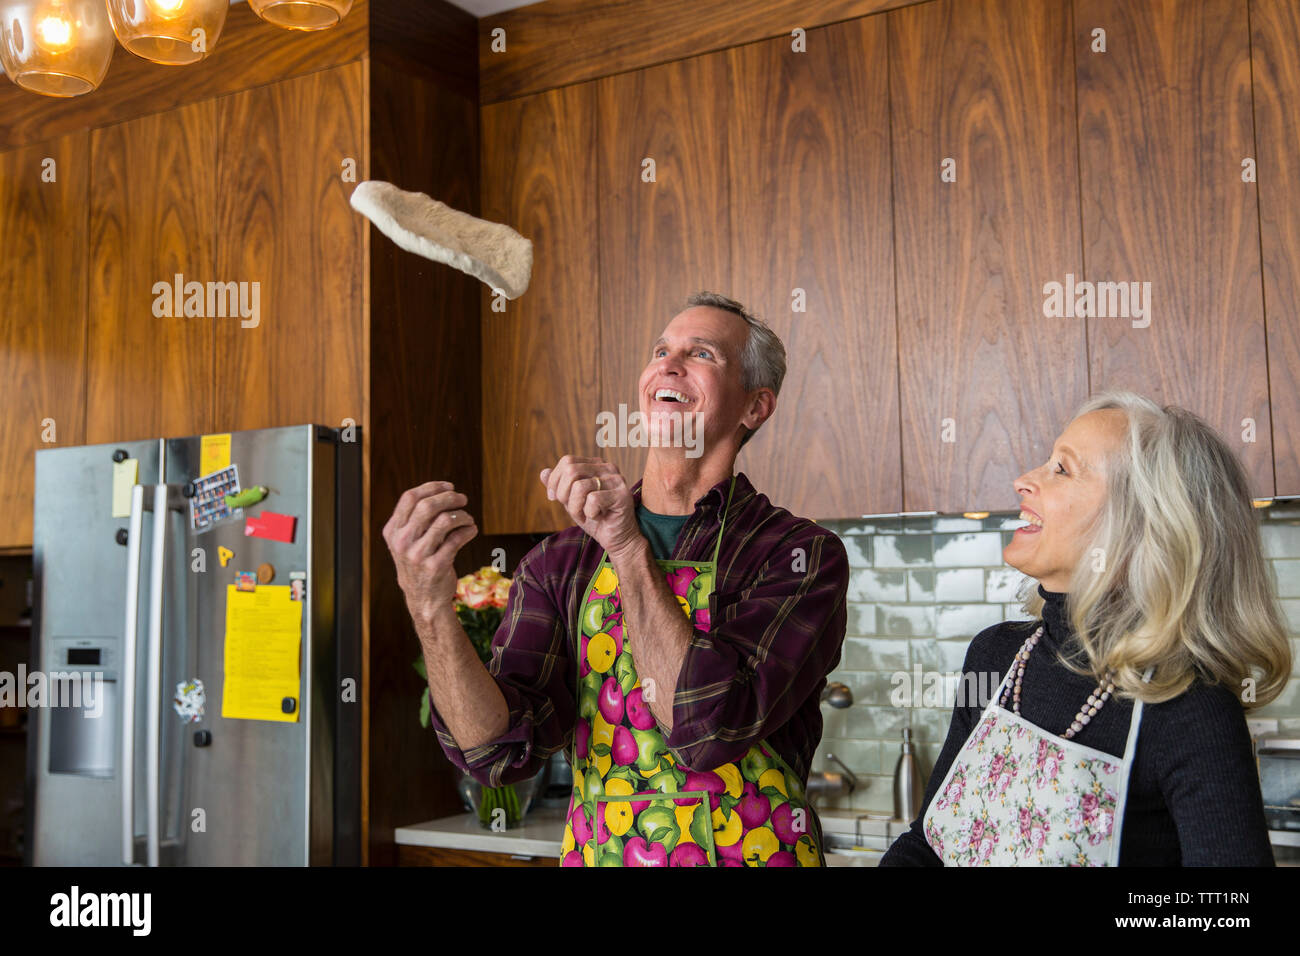 Cheerful man tossing pizza dough while preparing food by woman in kitchen at home Stock Photo